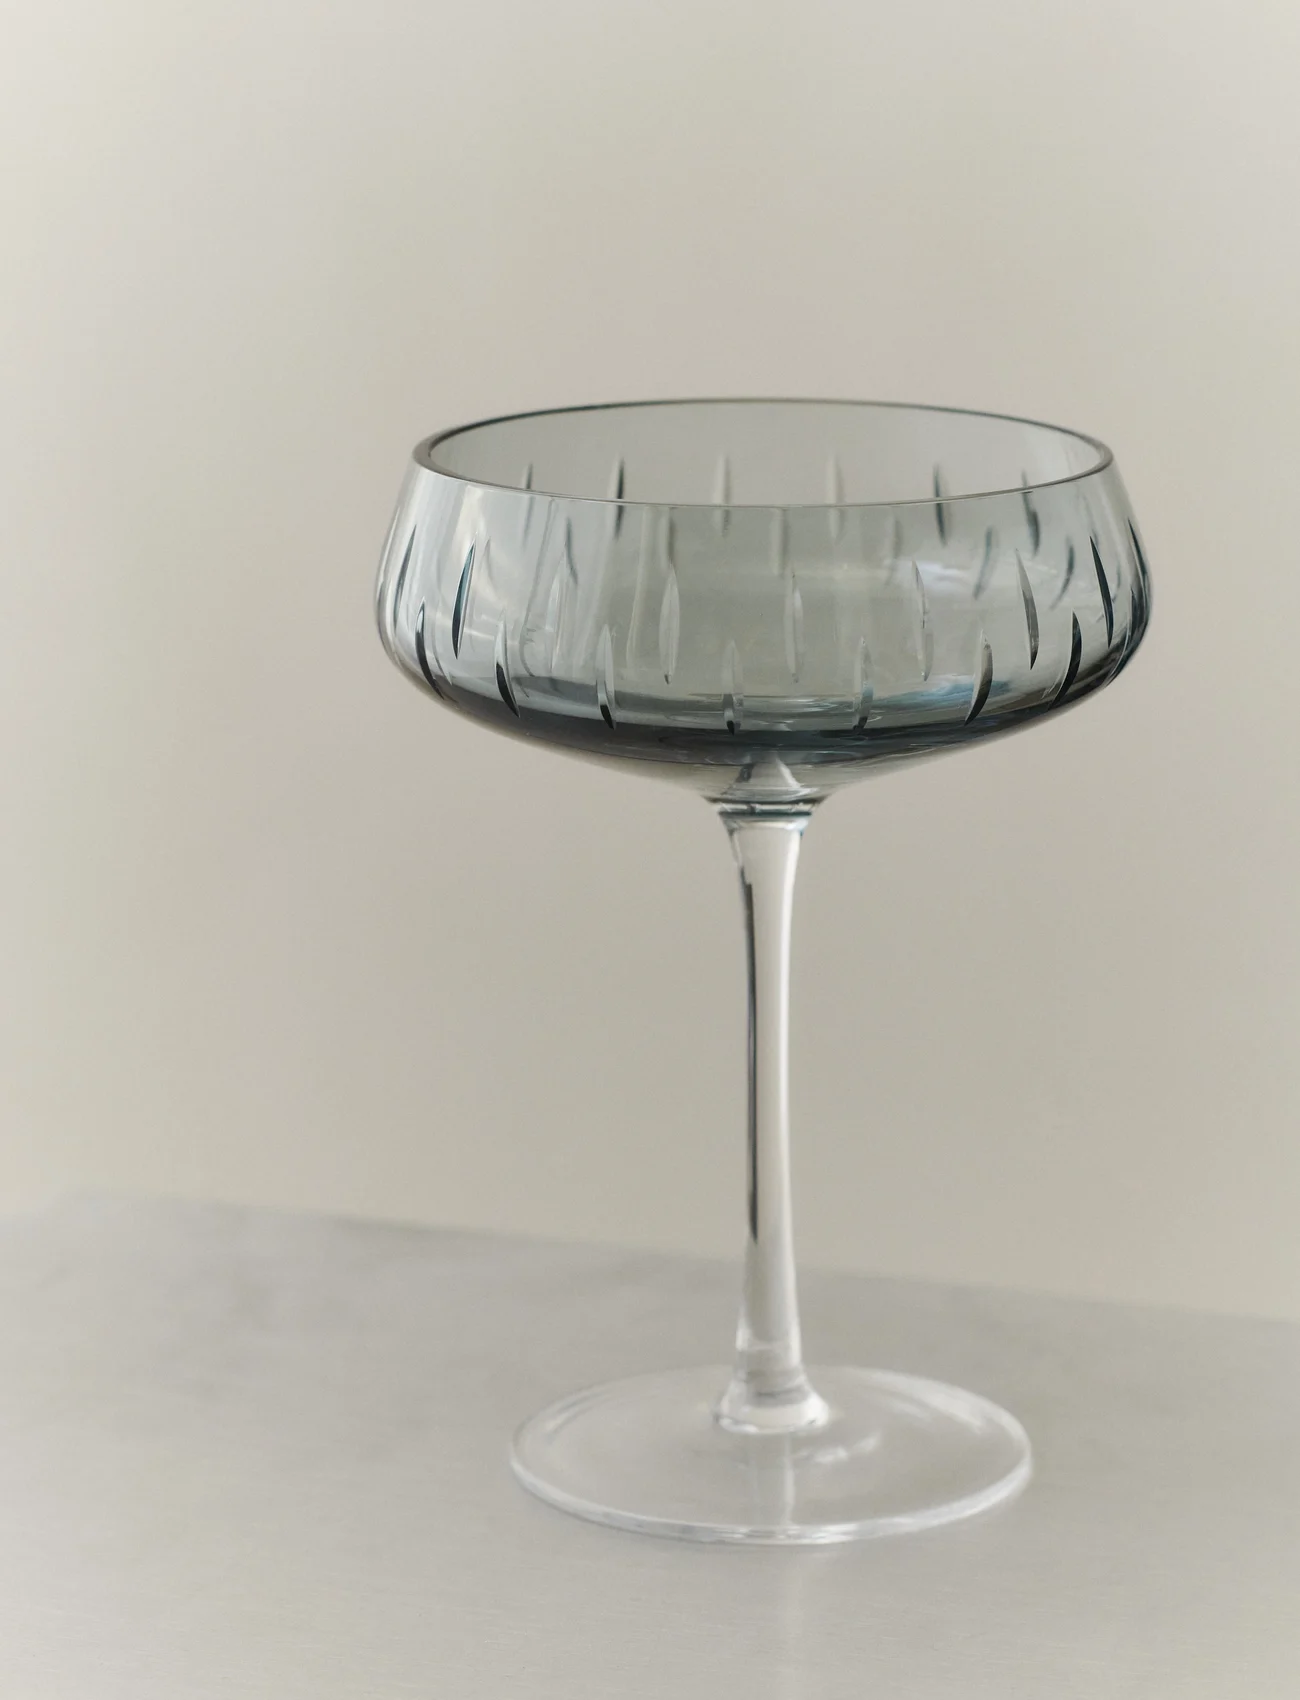 LOUISE ROE - Champagne Coupe - champagneglass - blue - 1